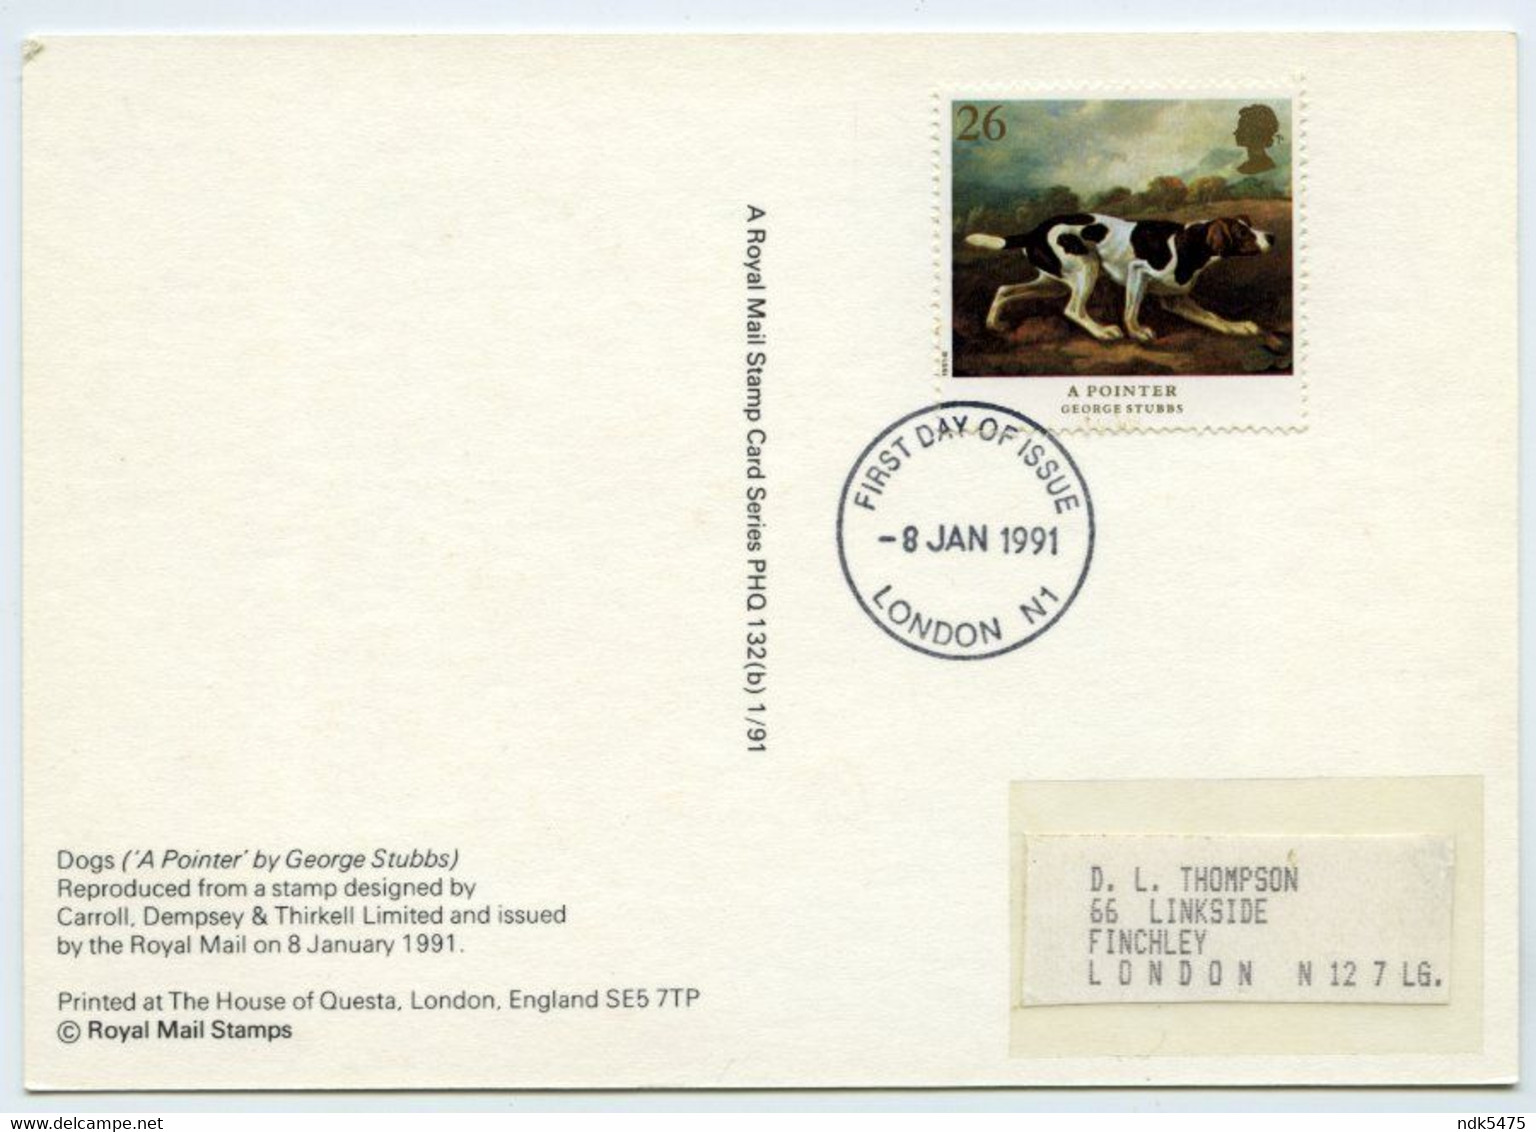 PHQ : GEORGE STUBBS - DOGS, A POINTER, 1991 : FIRST DAY OF ISSUE, LONDON N1, FINCHLEY (10 X 15cms Approx.) - PHQ Cards